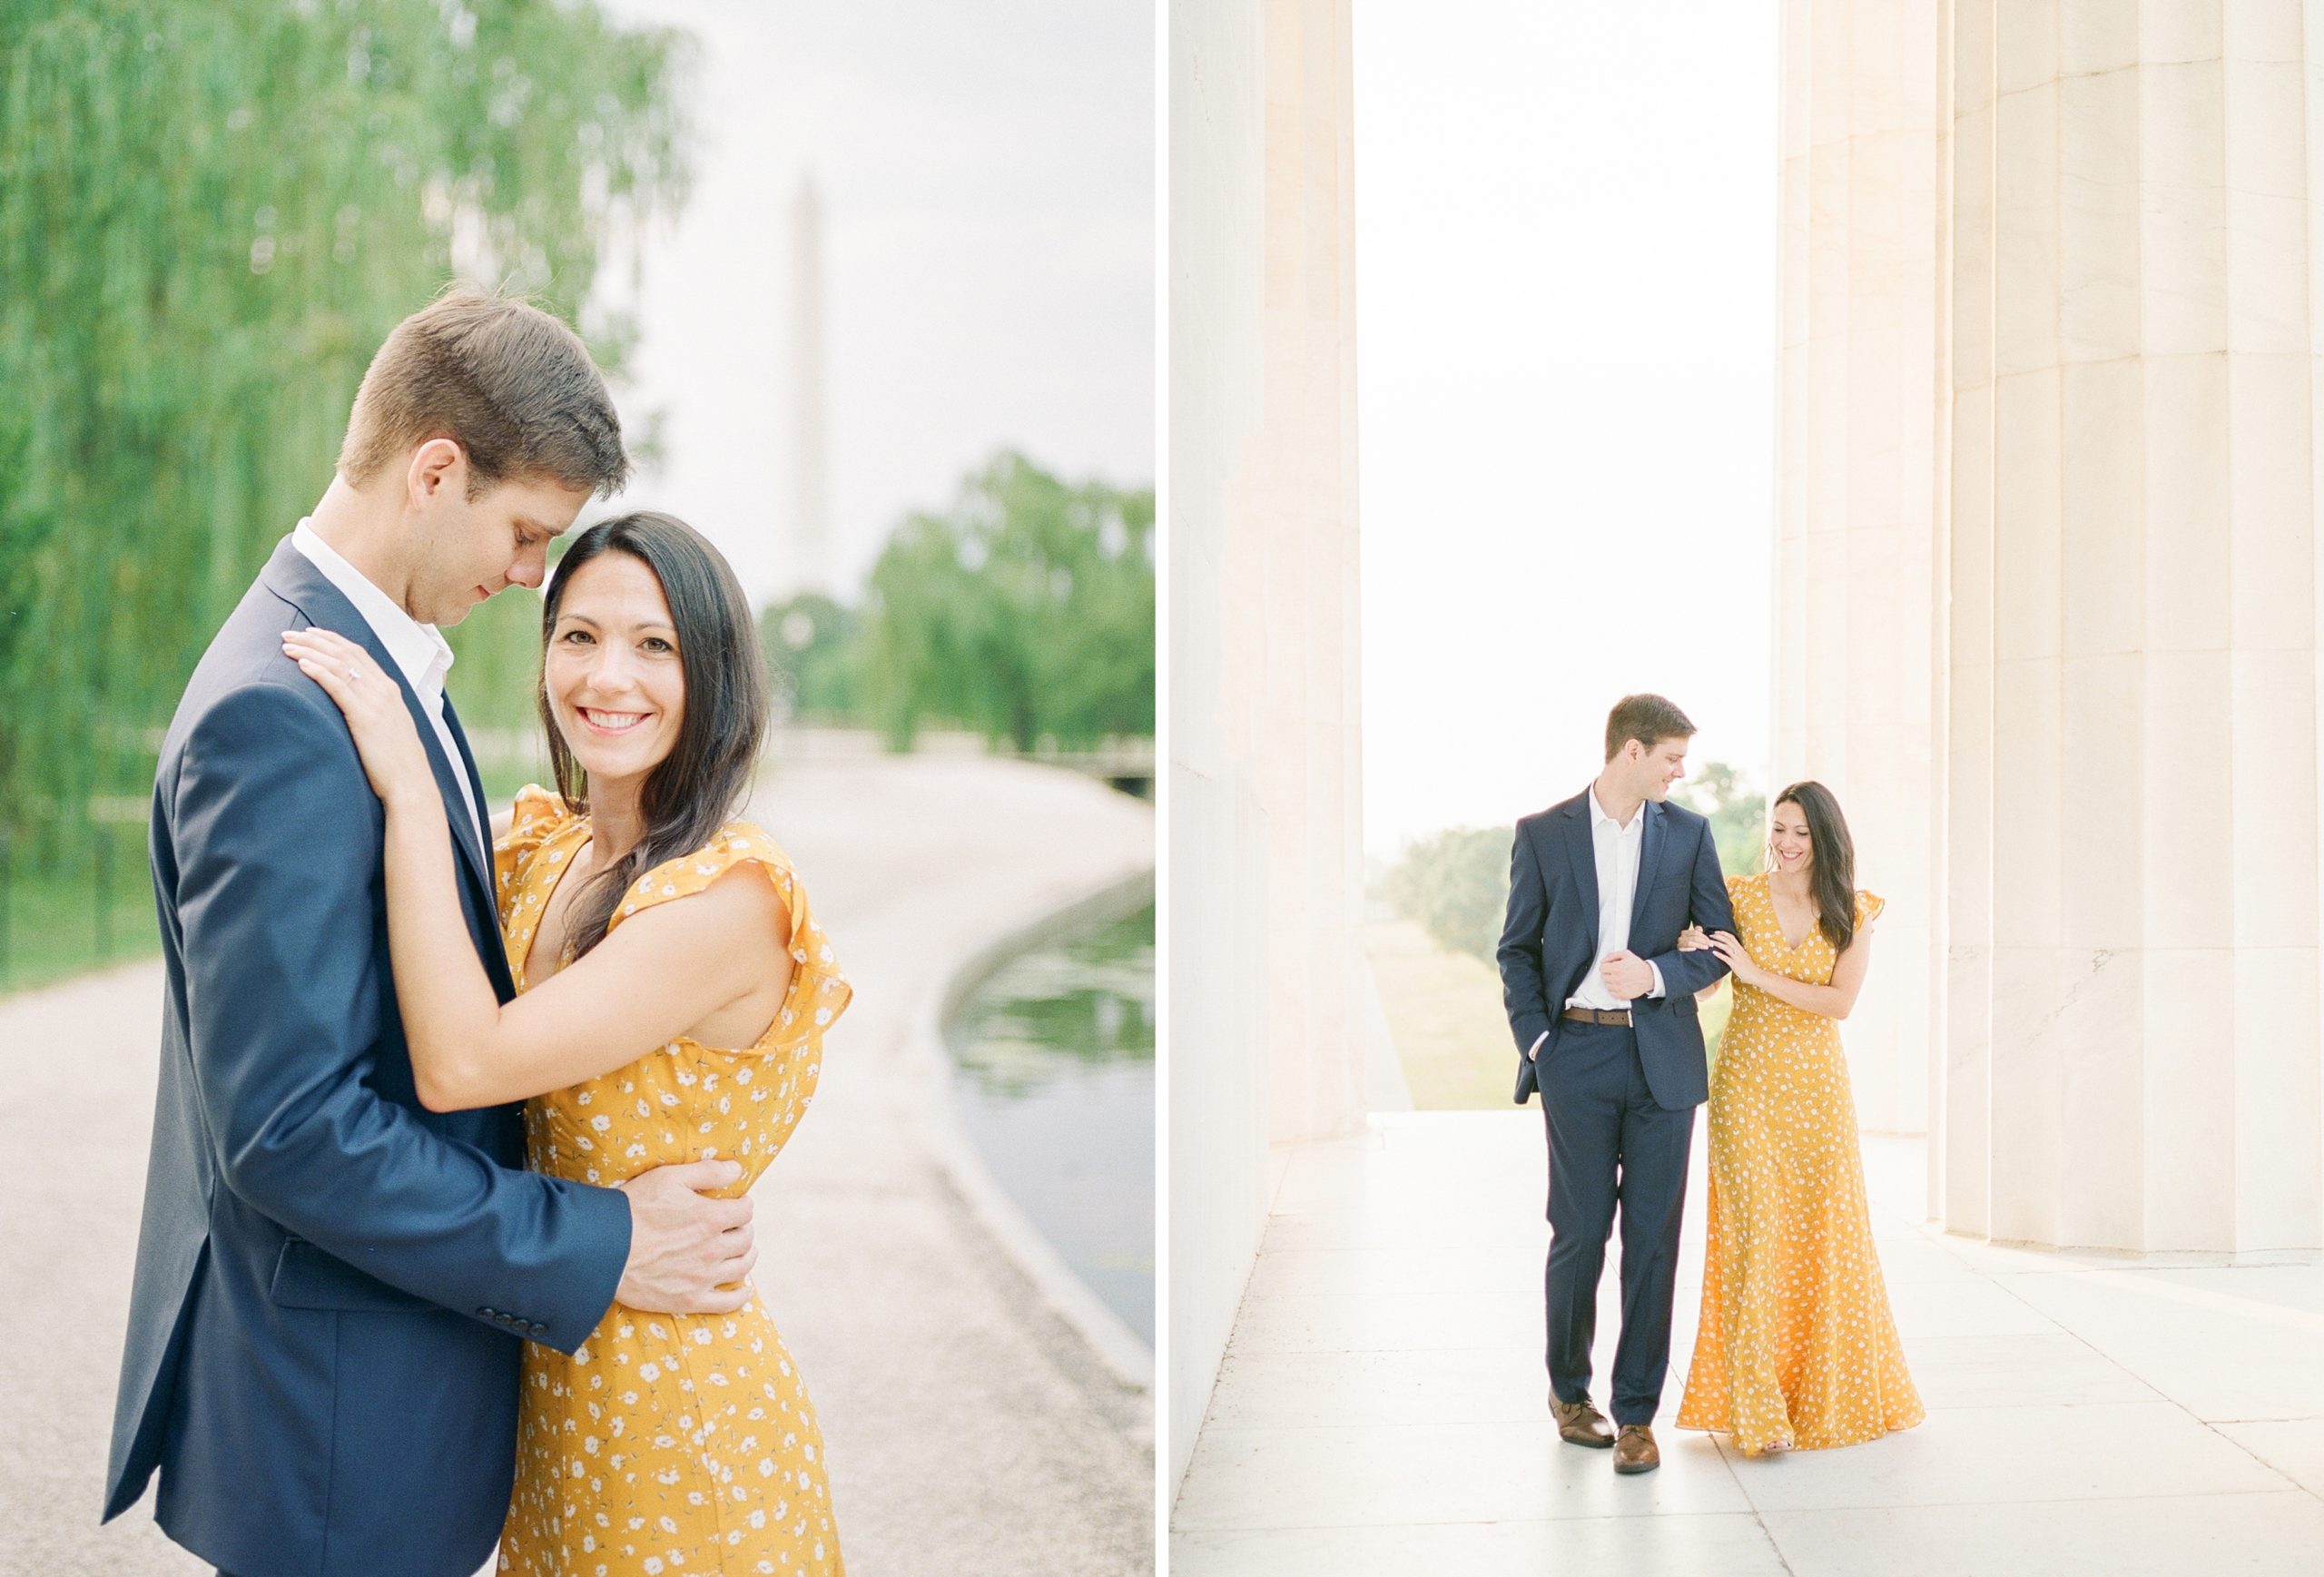 A beautiful sunrise engagement session in Washington, DC at the monuments captured by fine art film photographer, Alicia Lacey.